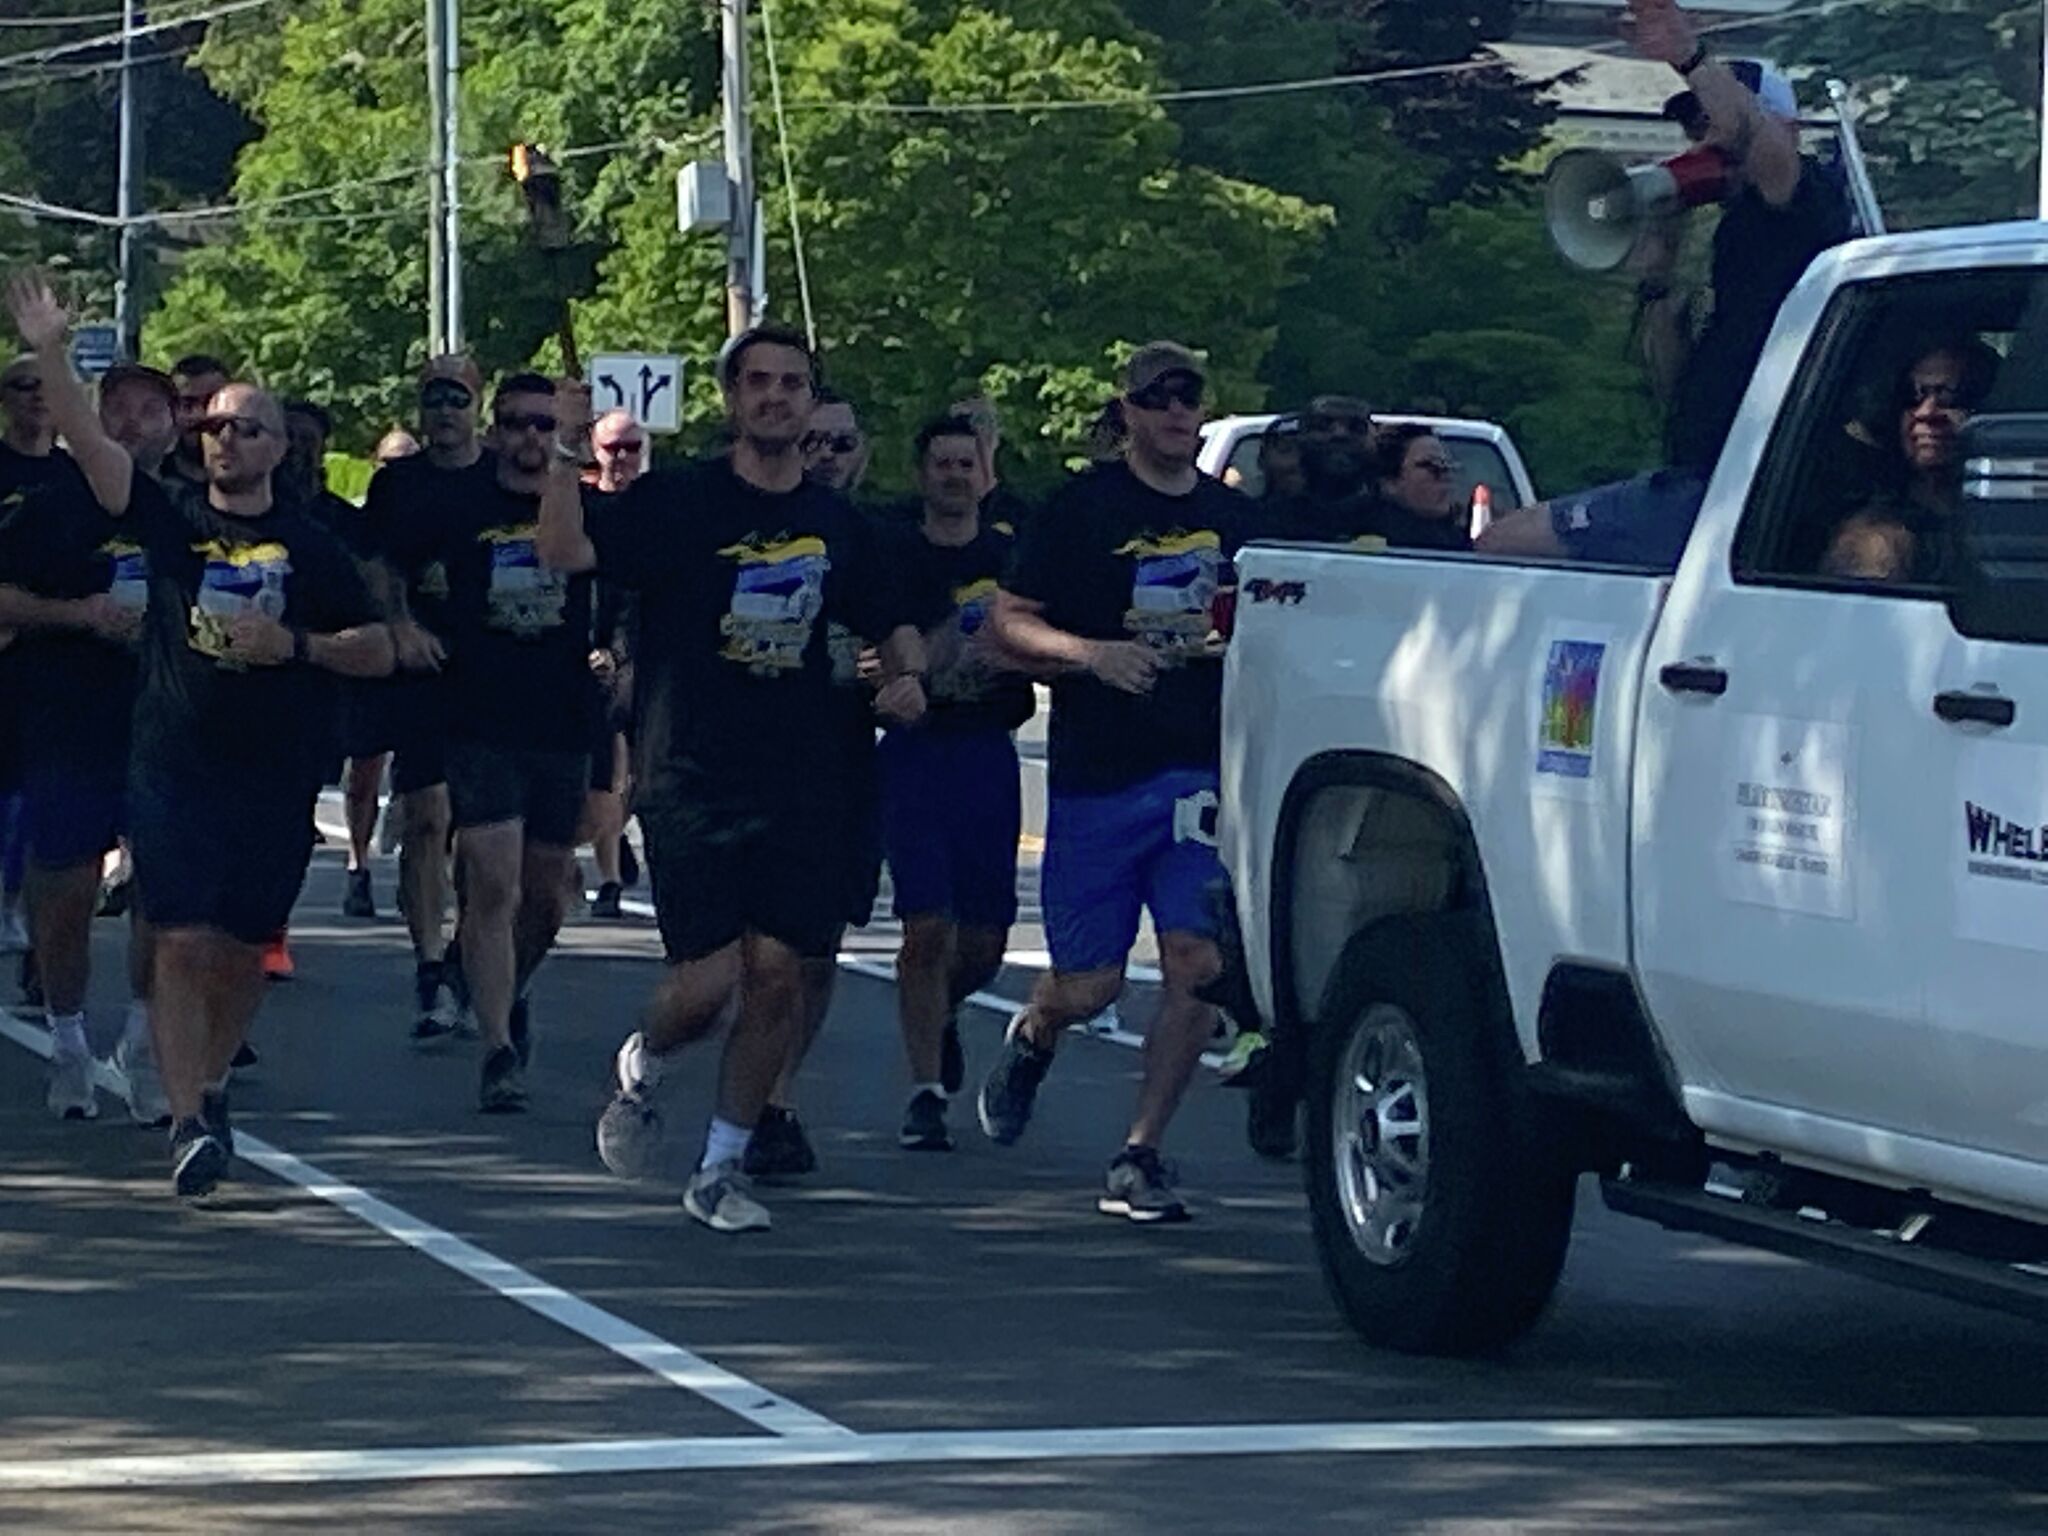 Over 100 in Special Olympics 'Torch Run' race through Ridgefield